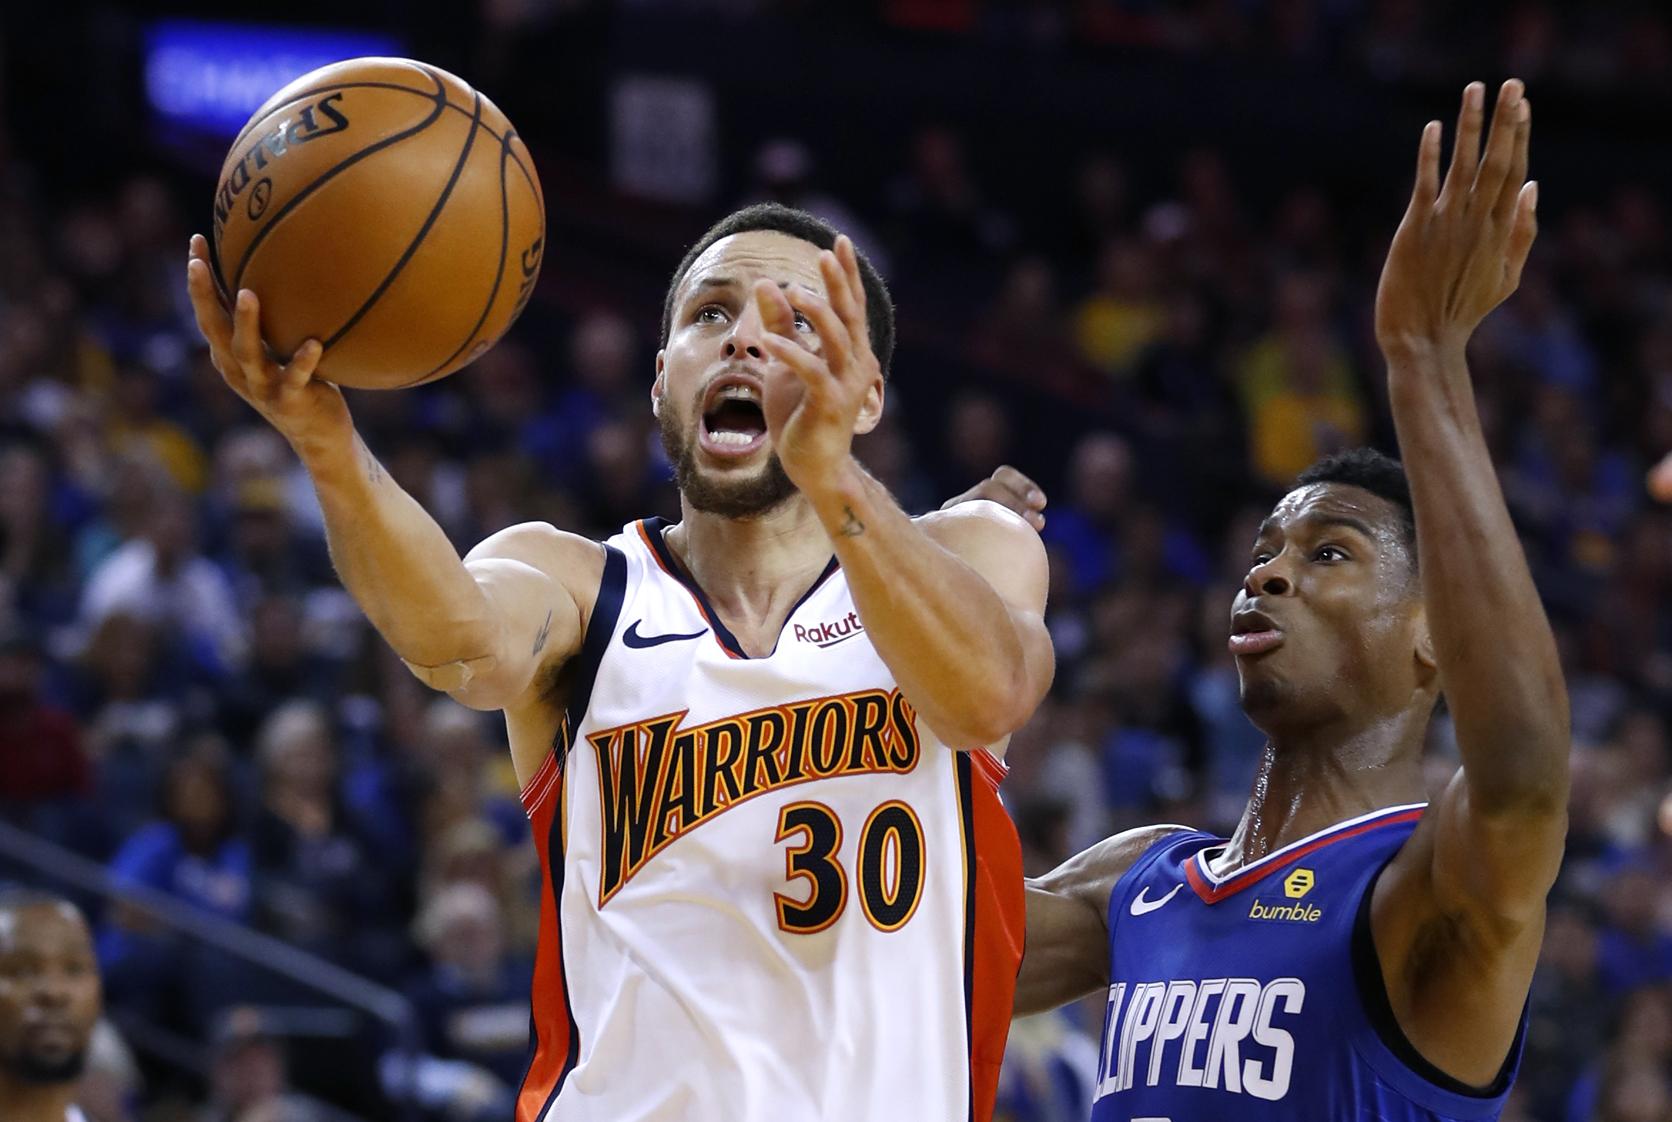 Warriors defeat Kings in Game 4, despite Steph Curry mental mistake